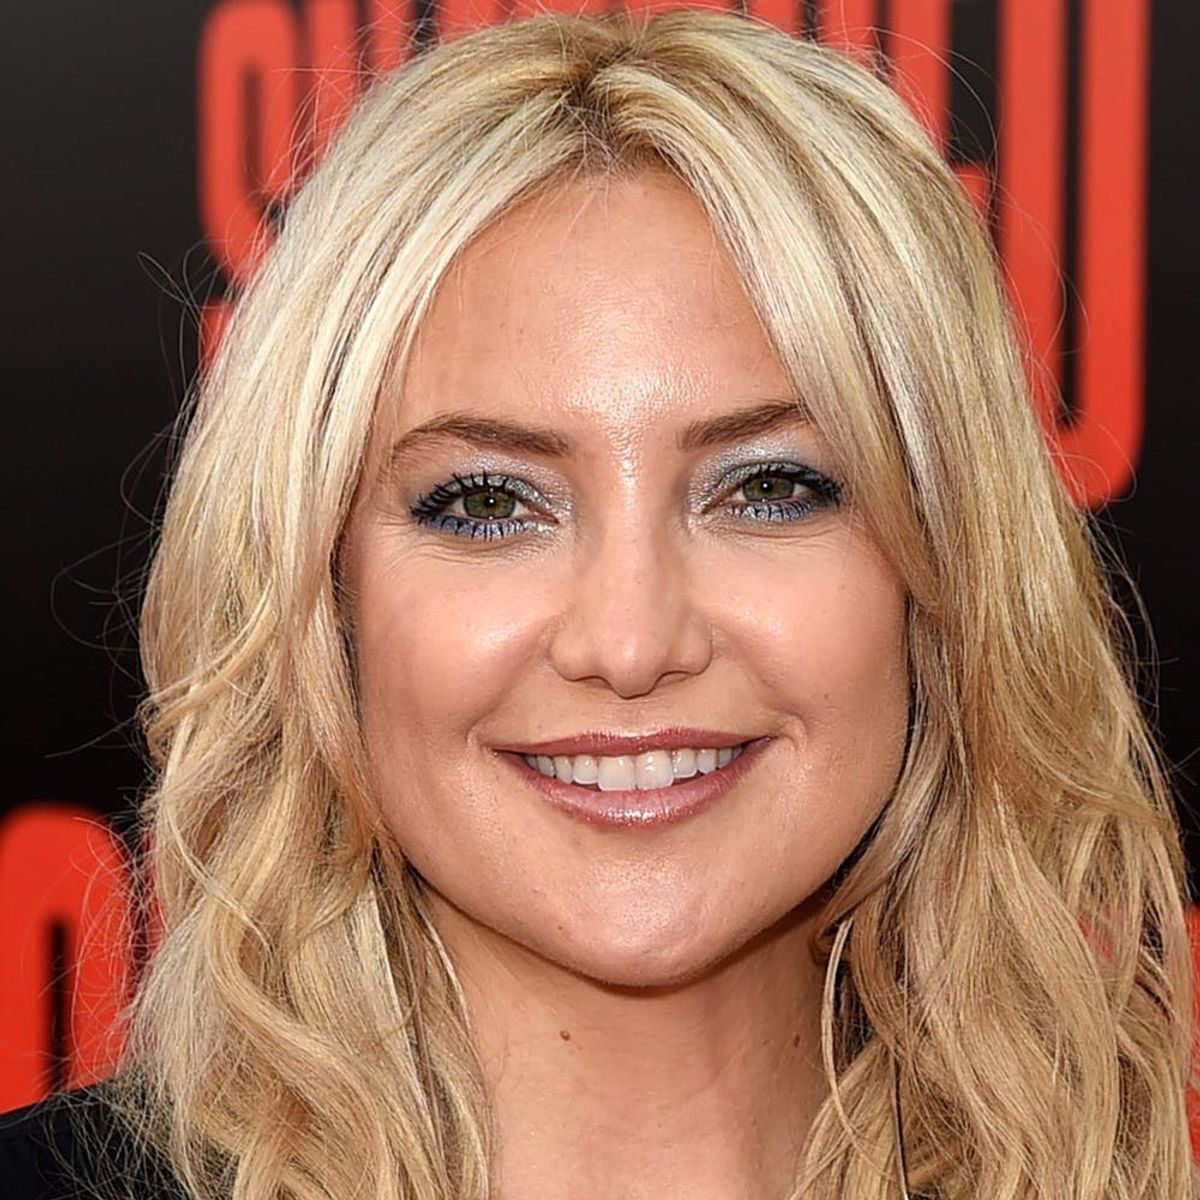 Kate Hudson Responds in the Most Badass Way When Asked If Her Boyfriend Likes Her Haircut